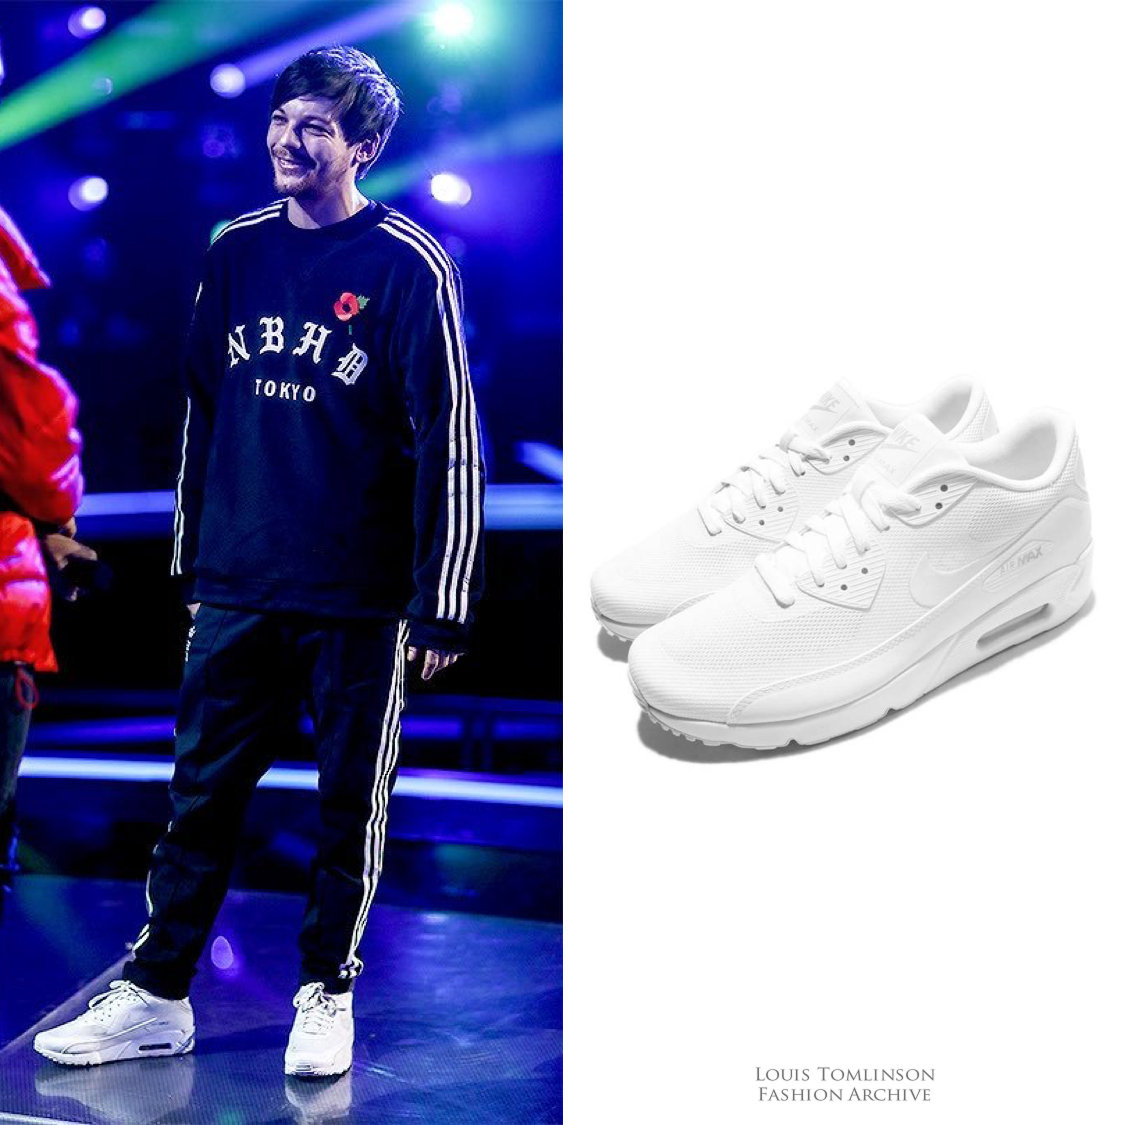 Louis Tomlinson Fashion Archive — Louis at XFactor Rehearsals